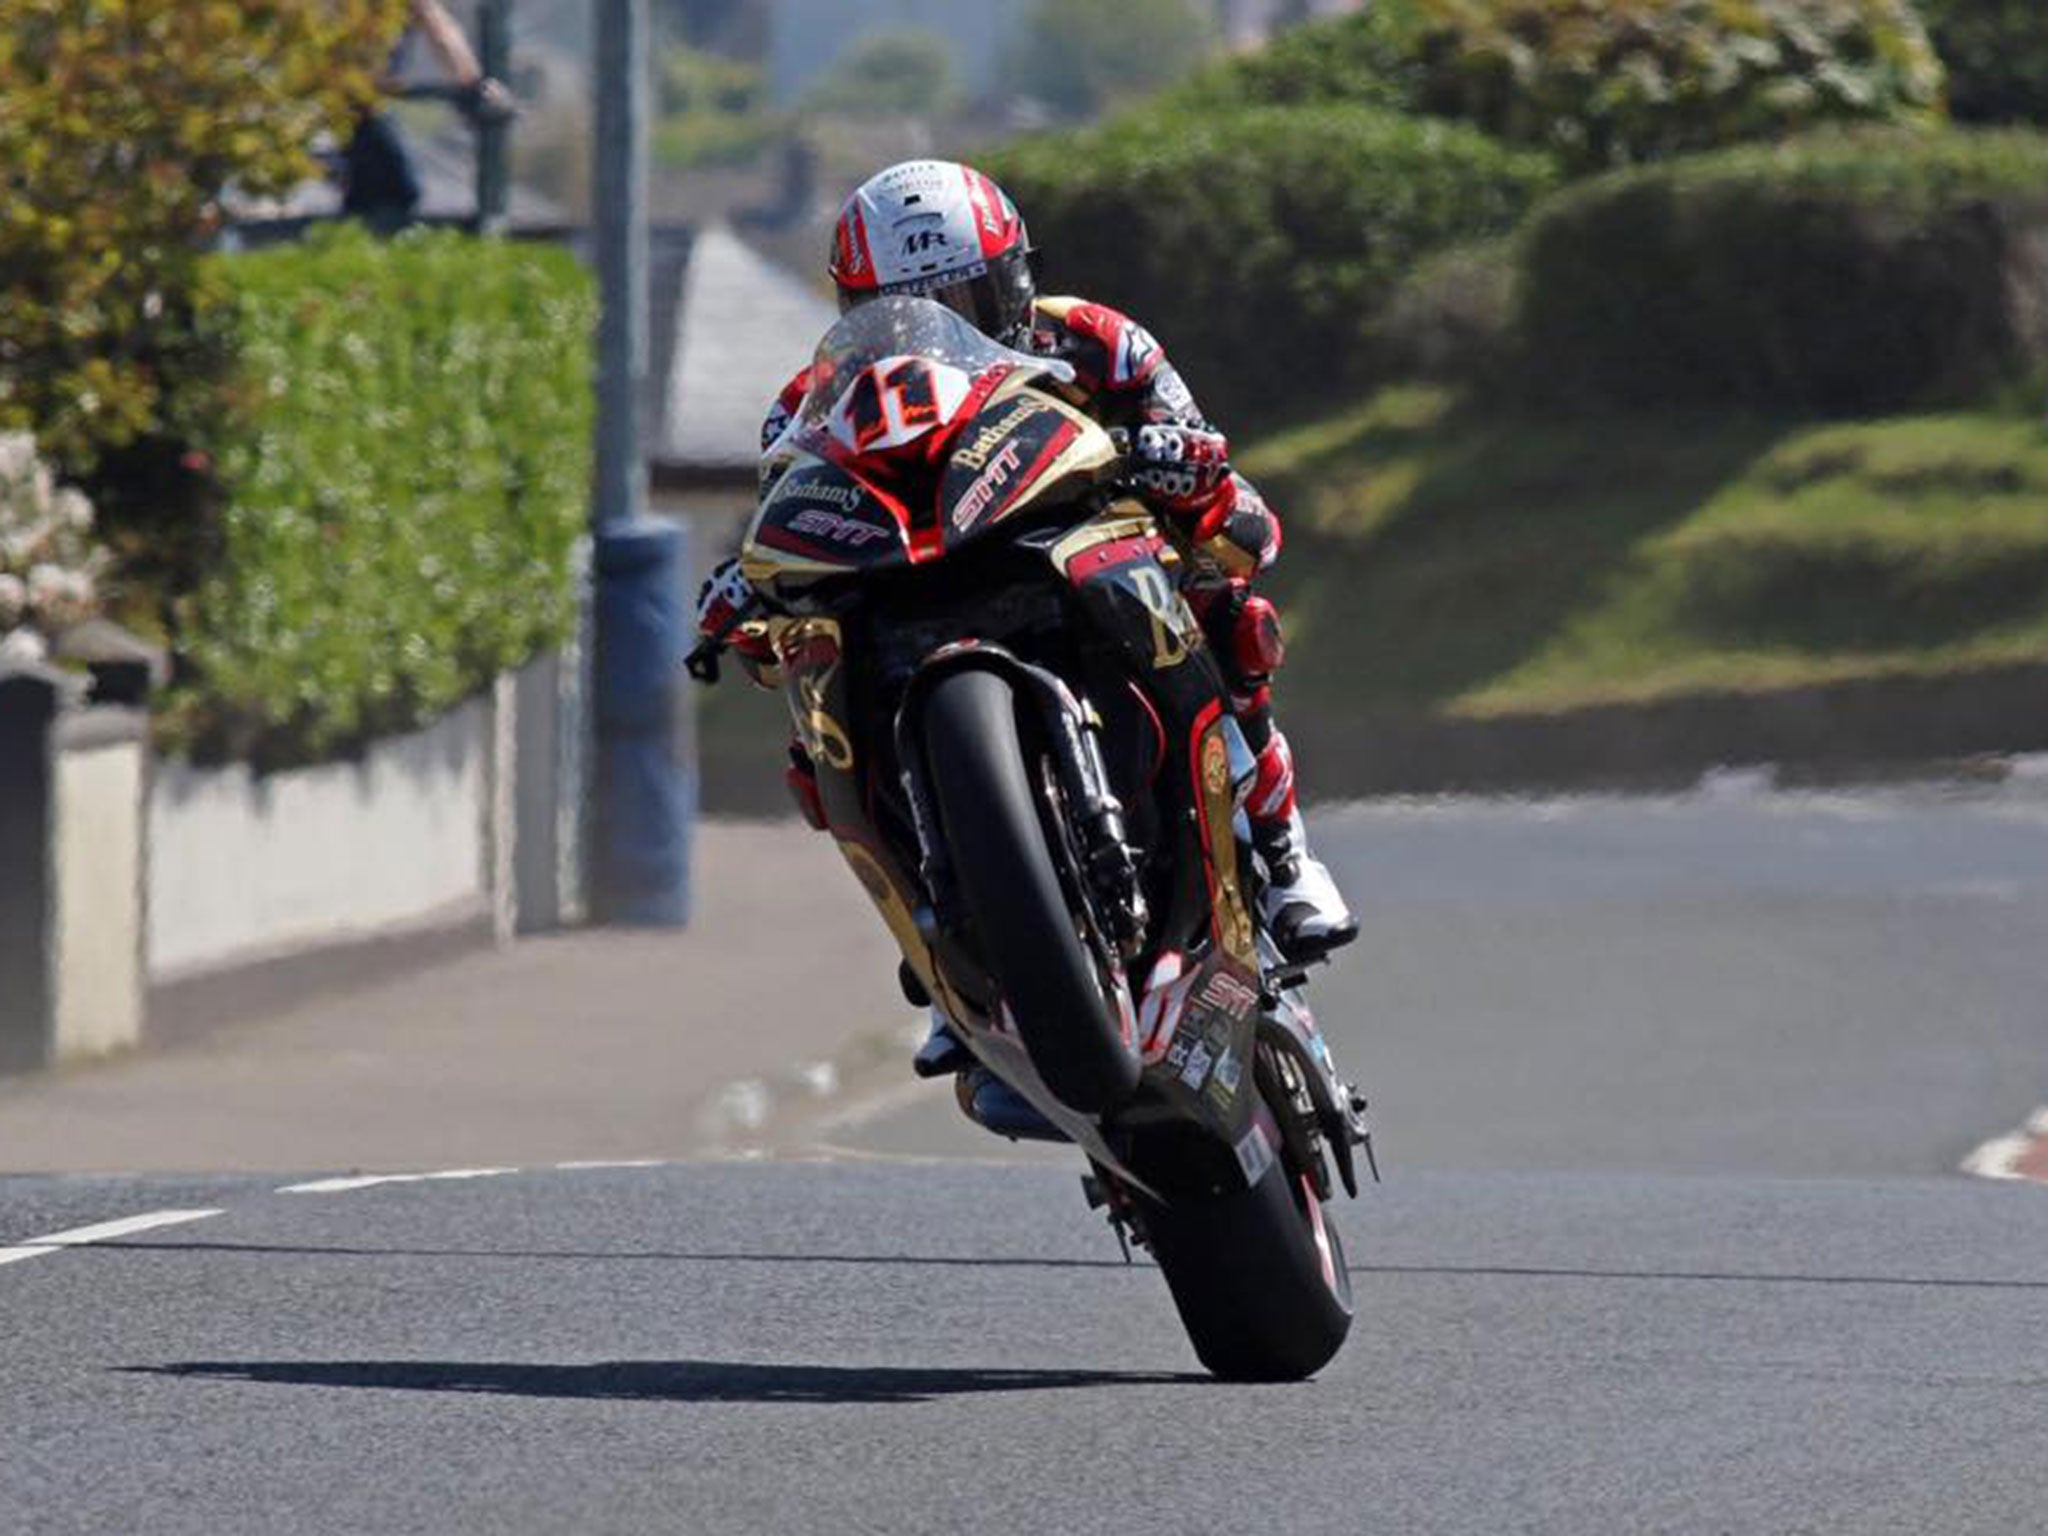 Michael Rutter set the fastest time of the day across all classes on his superstock